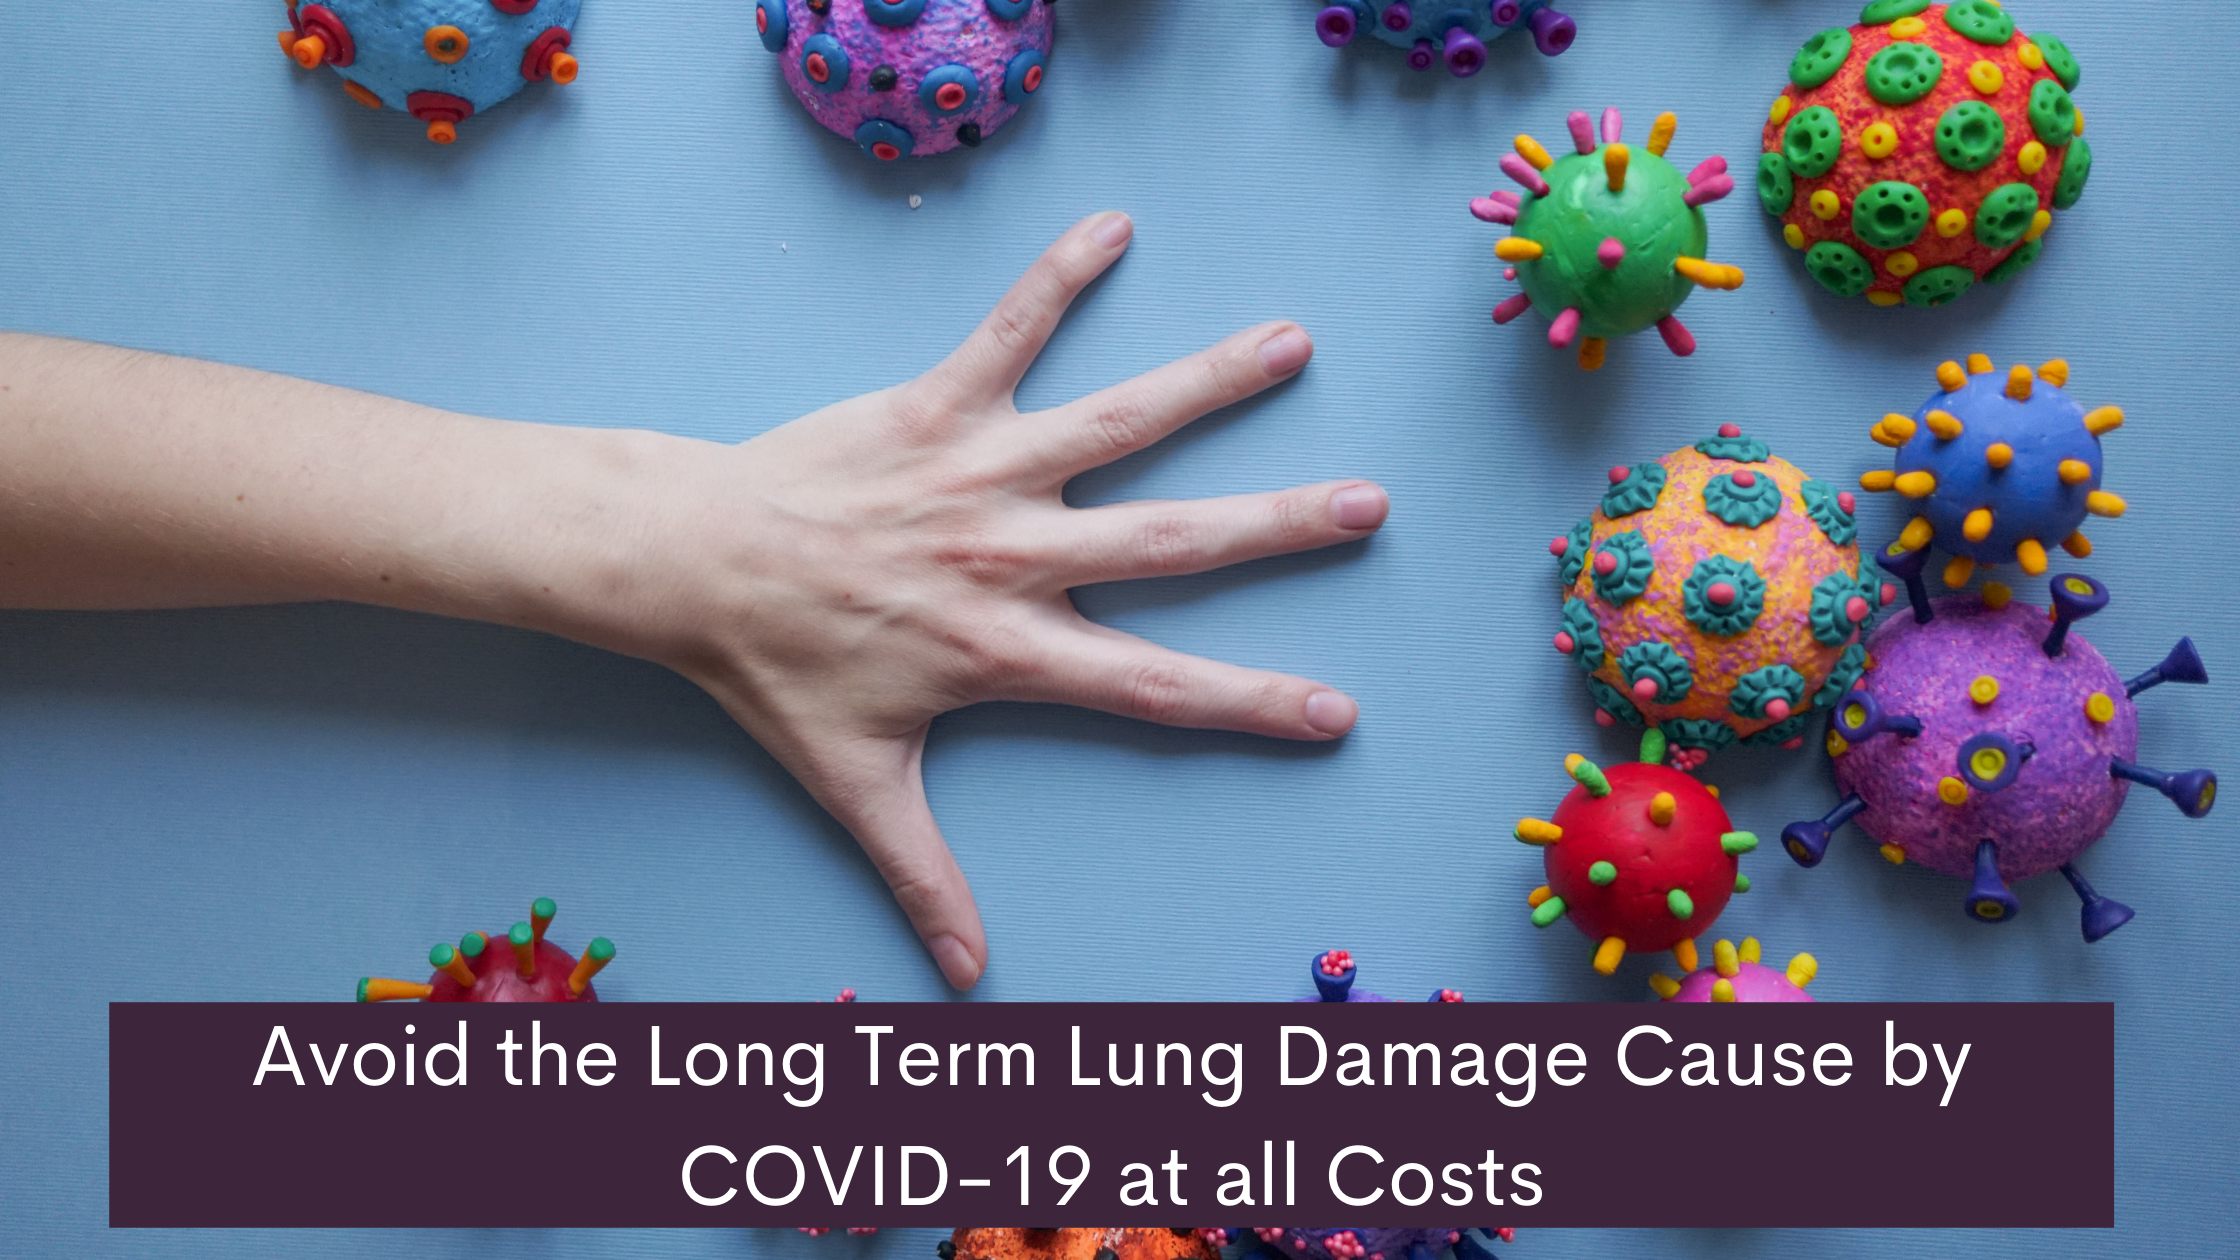 Avoid the Long Term Lung Damage Cause by COVID-19 at all Costs